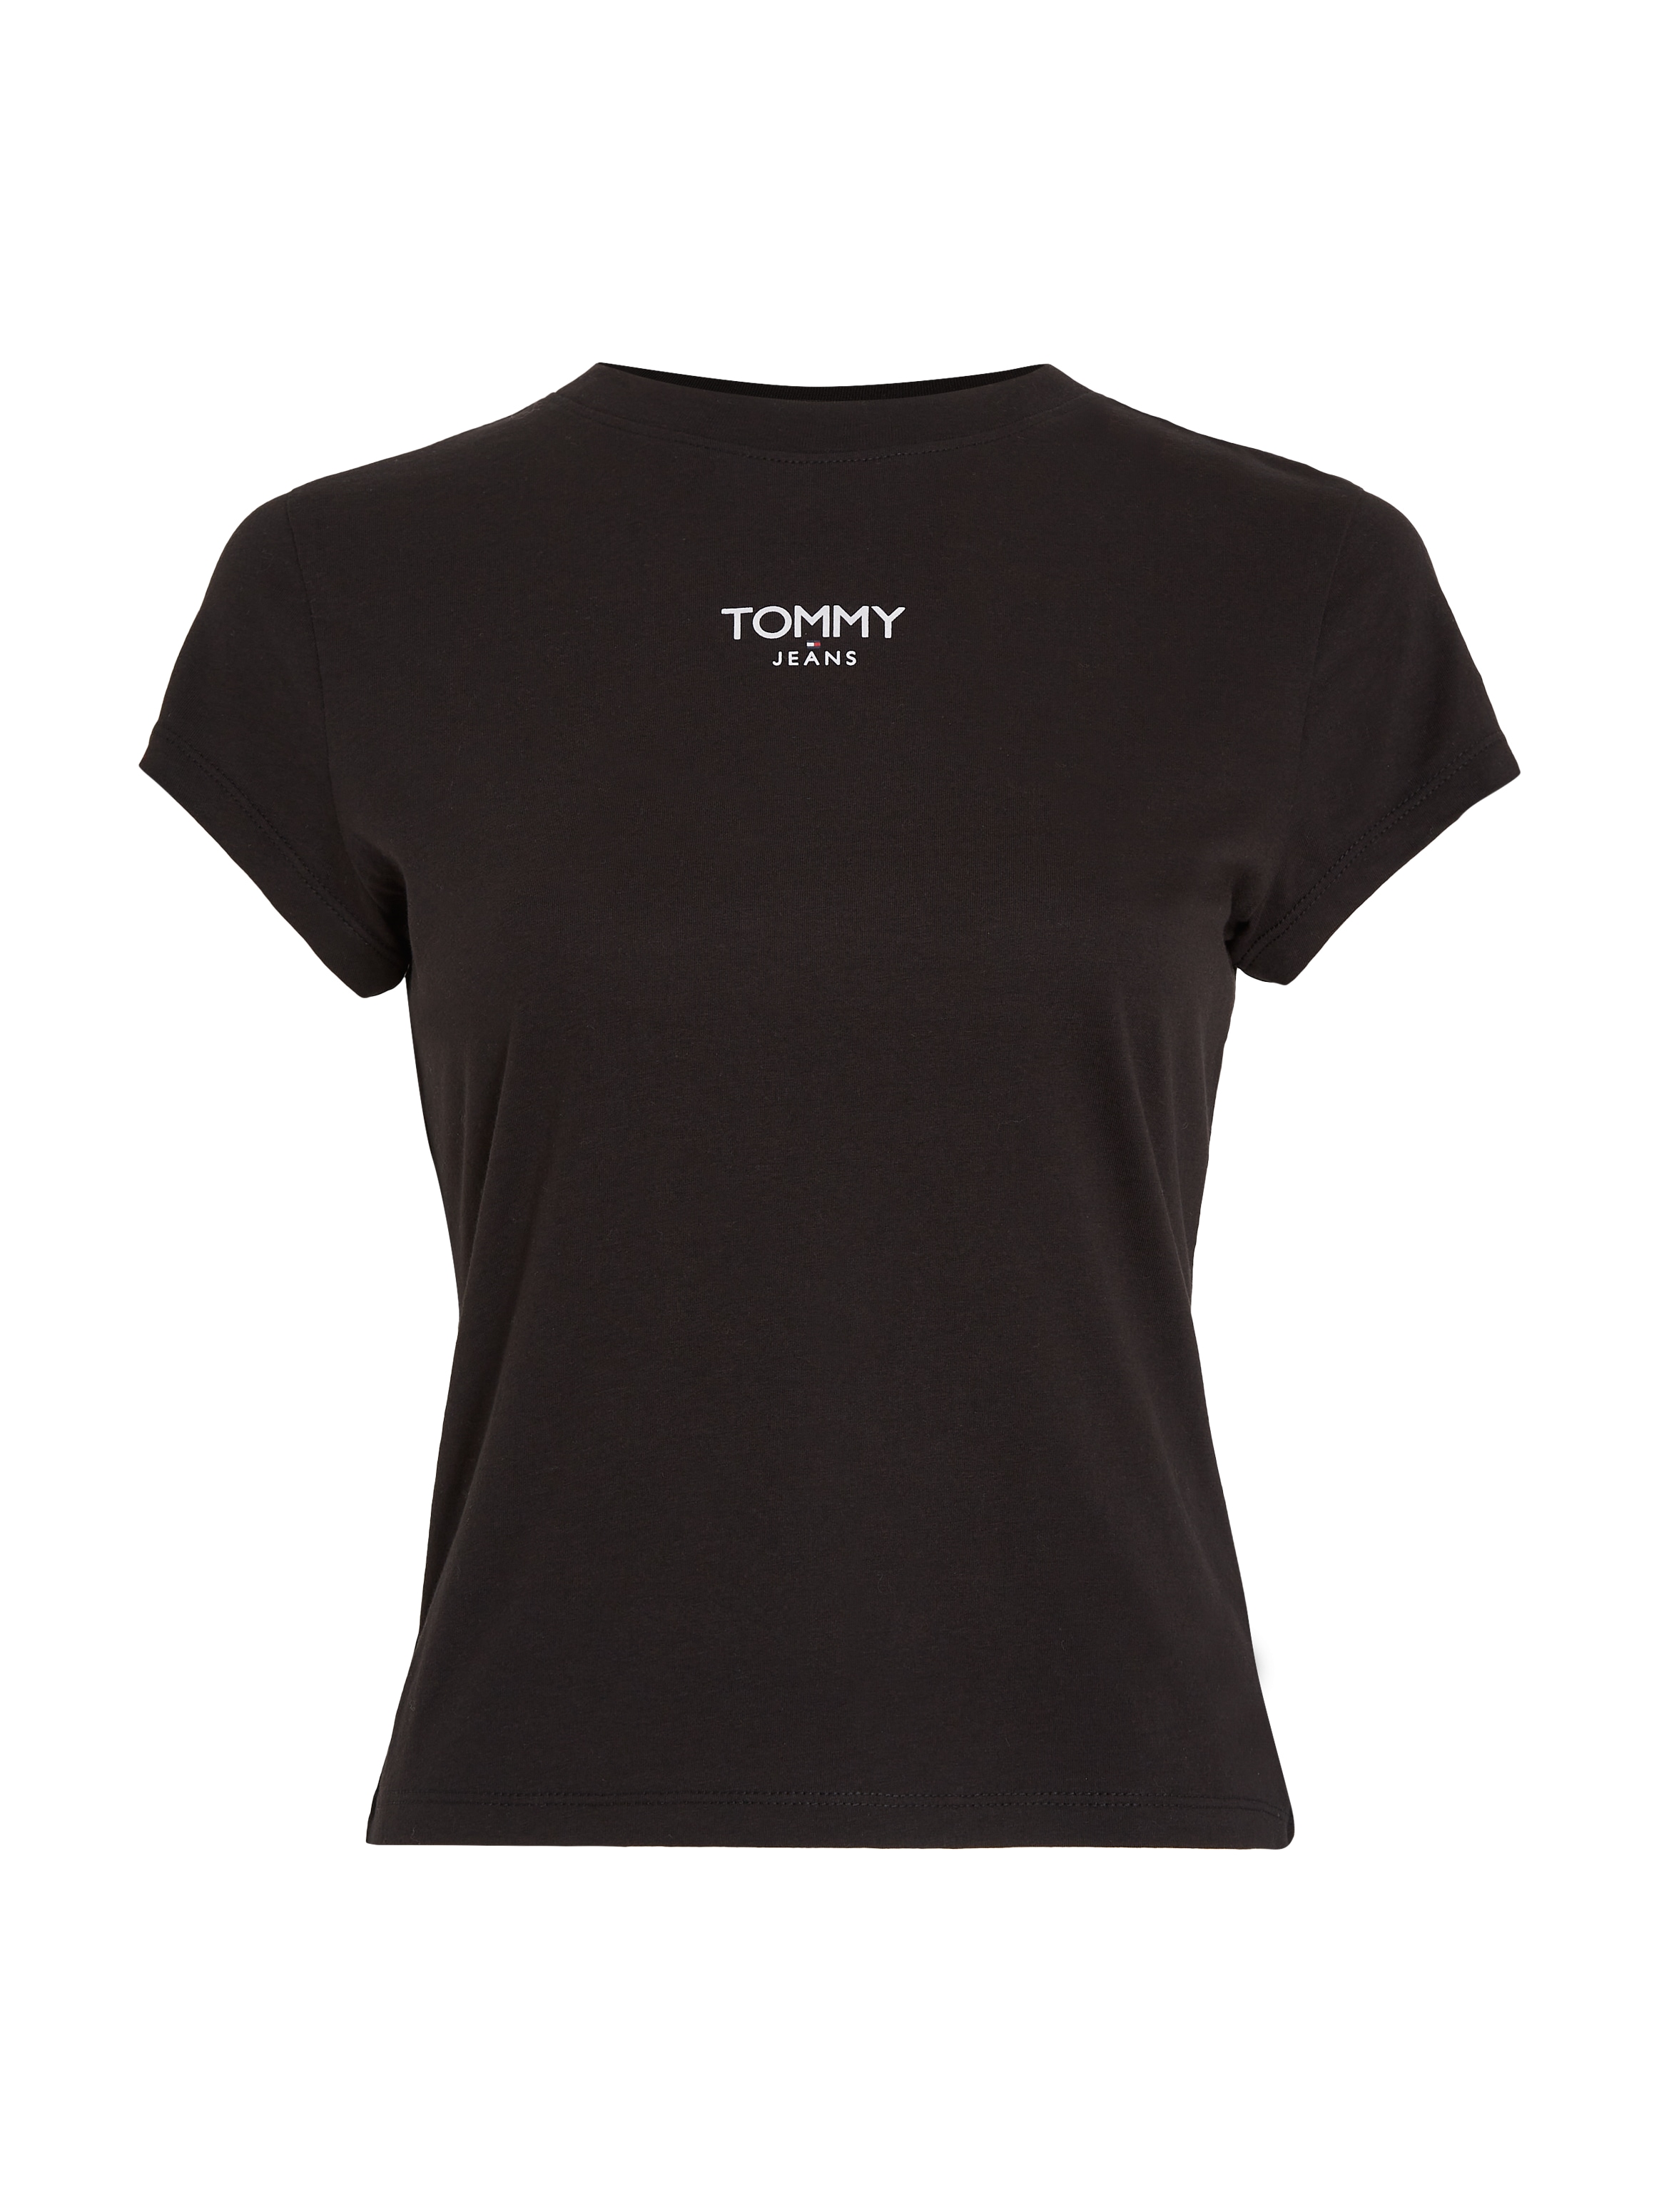 Tommy Jeans T-Shirt »TJW BBY ESSENTIAL LOGO 1 SS«, mit Tommy Jeans Logo bei  ♕ | T-Shirts